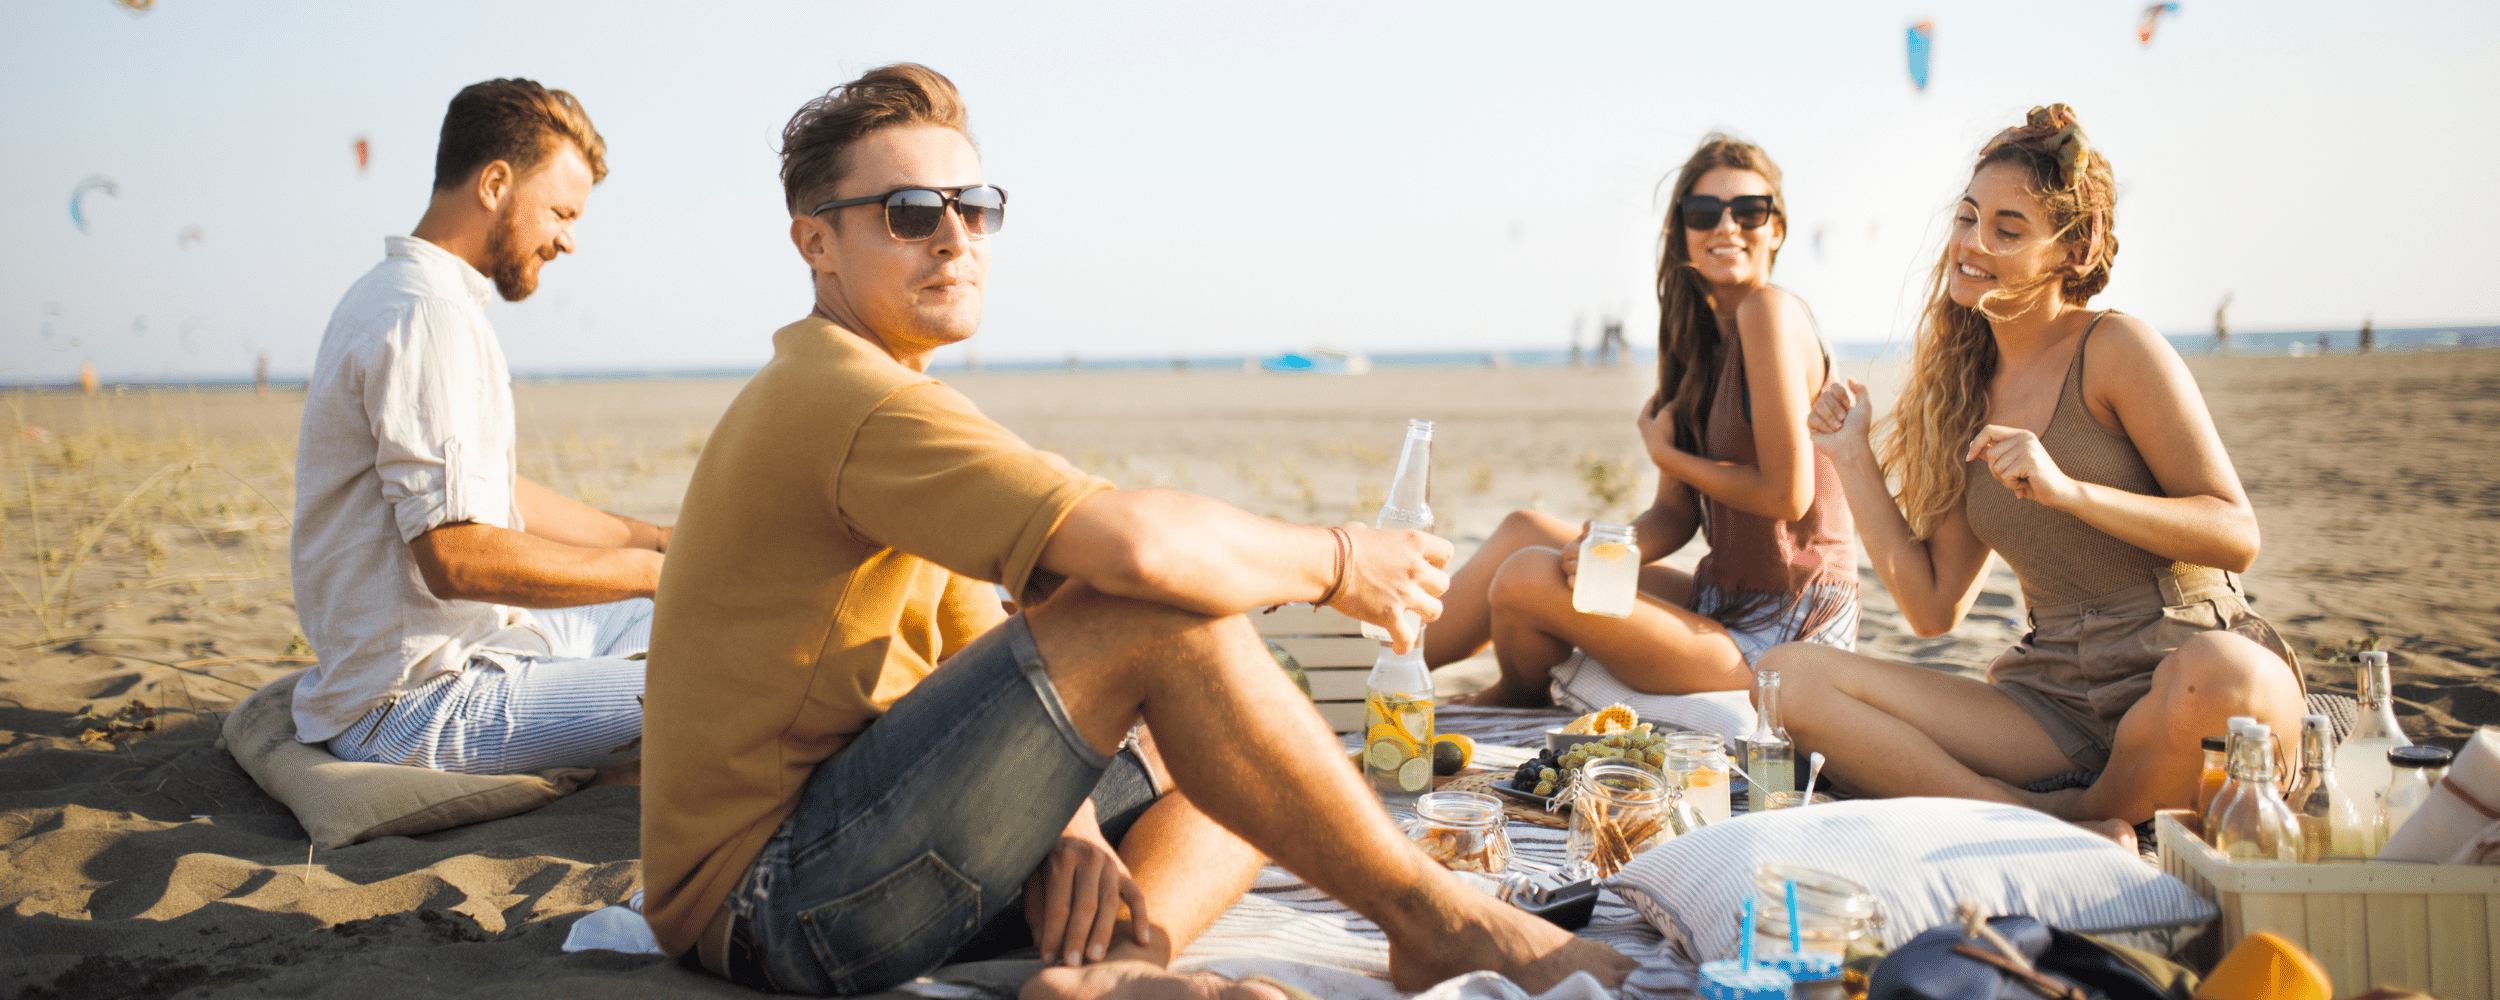 young men and women picnicking by the beach